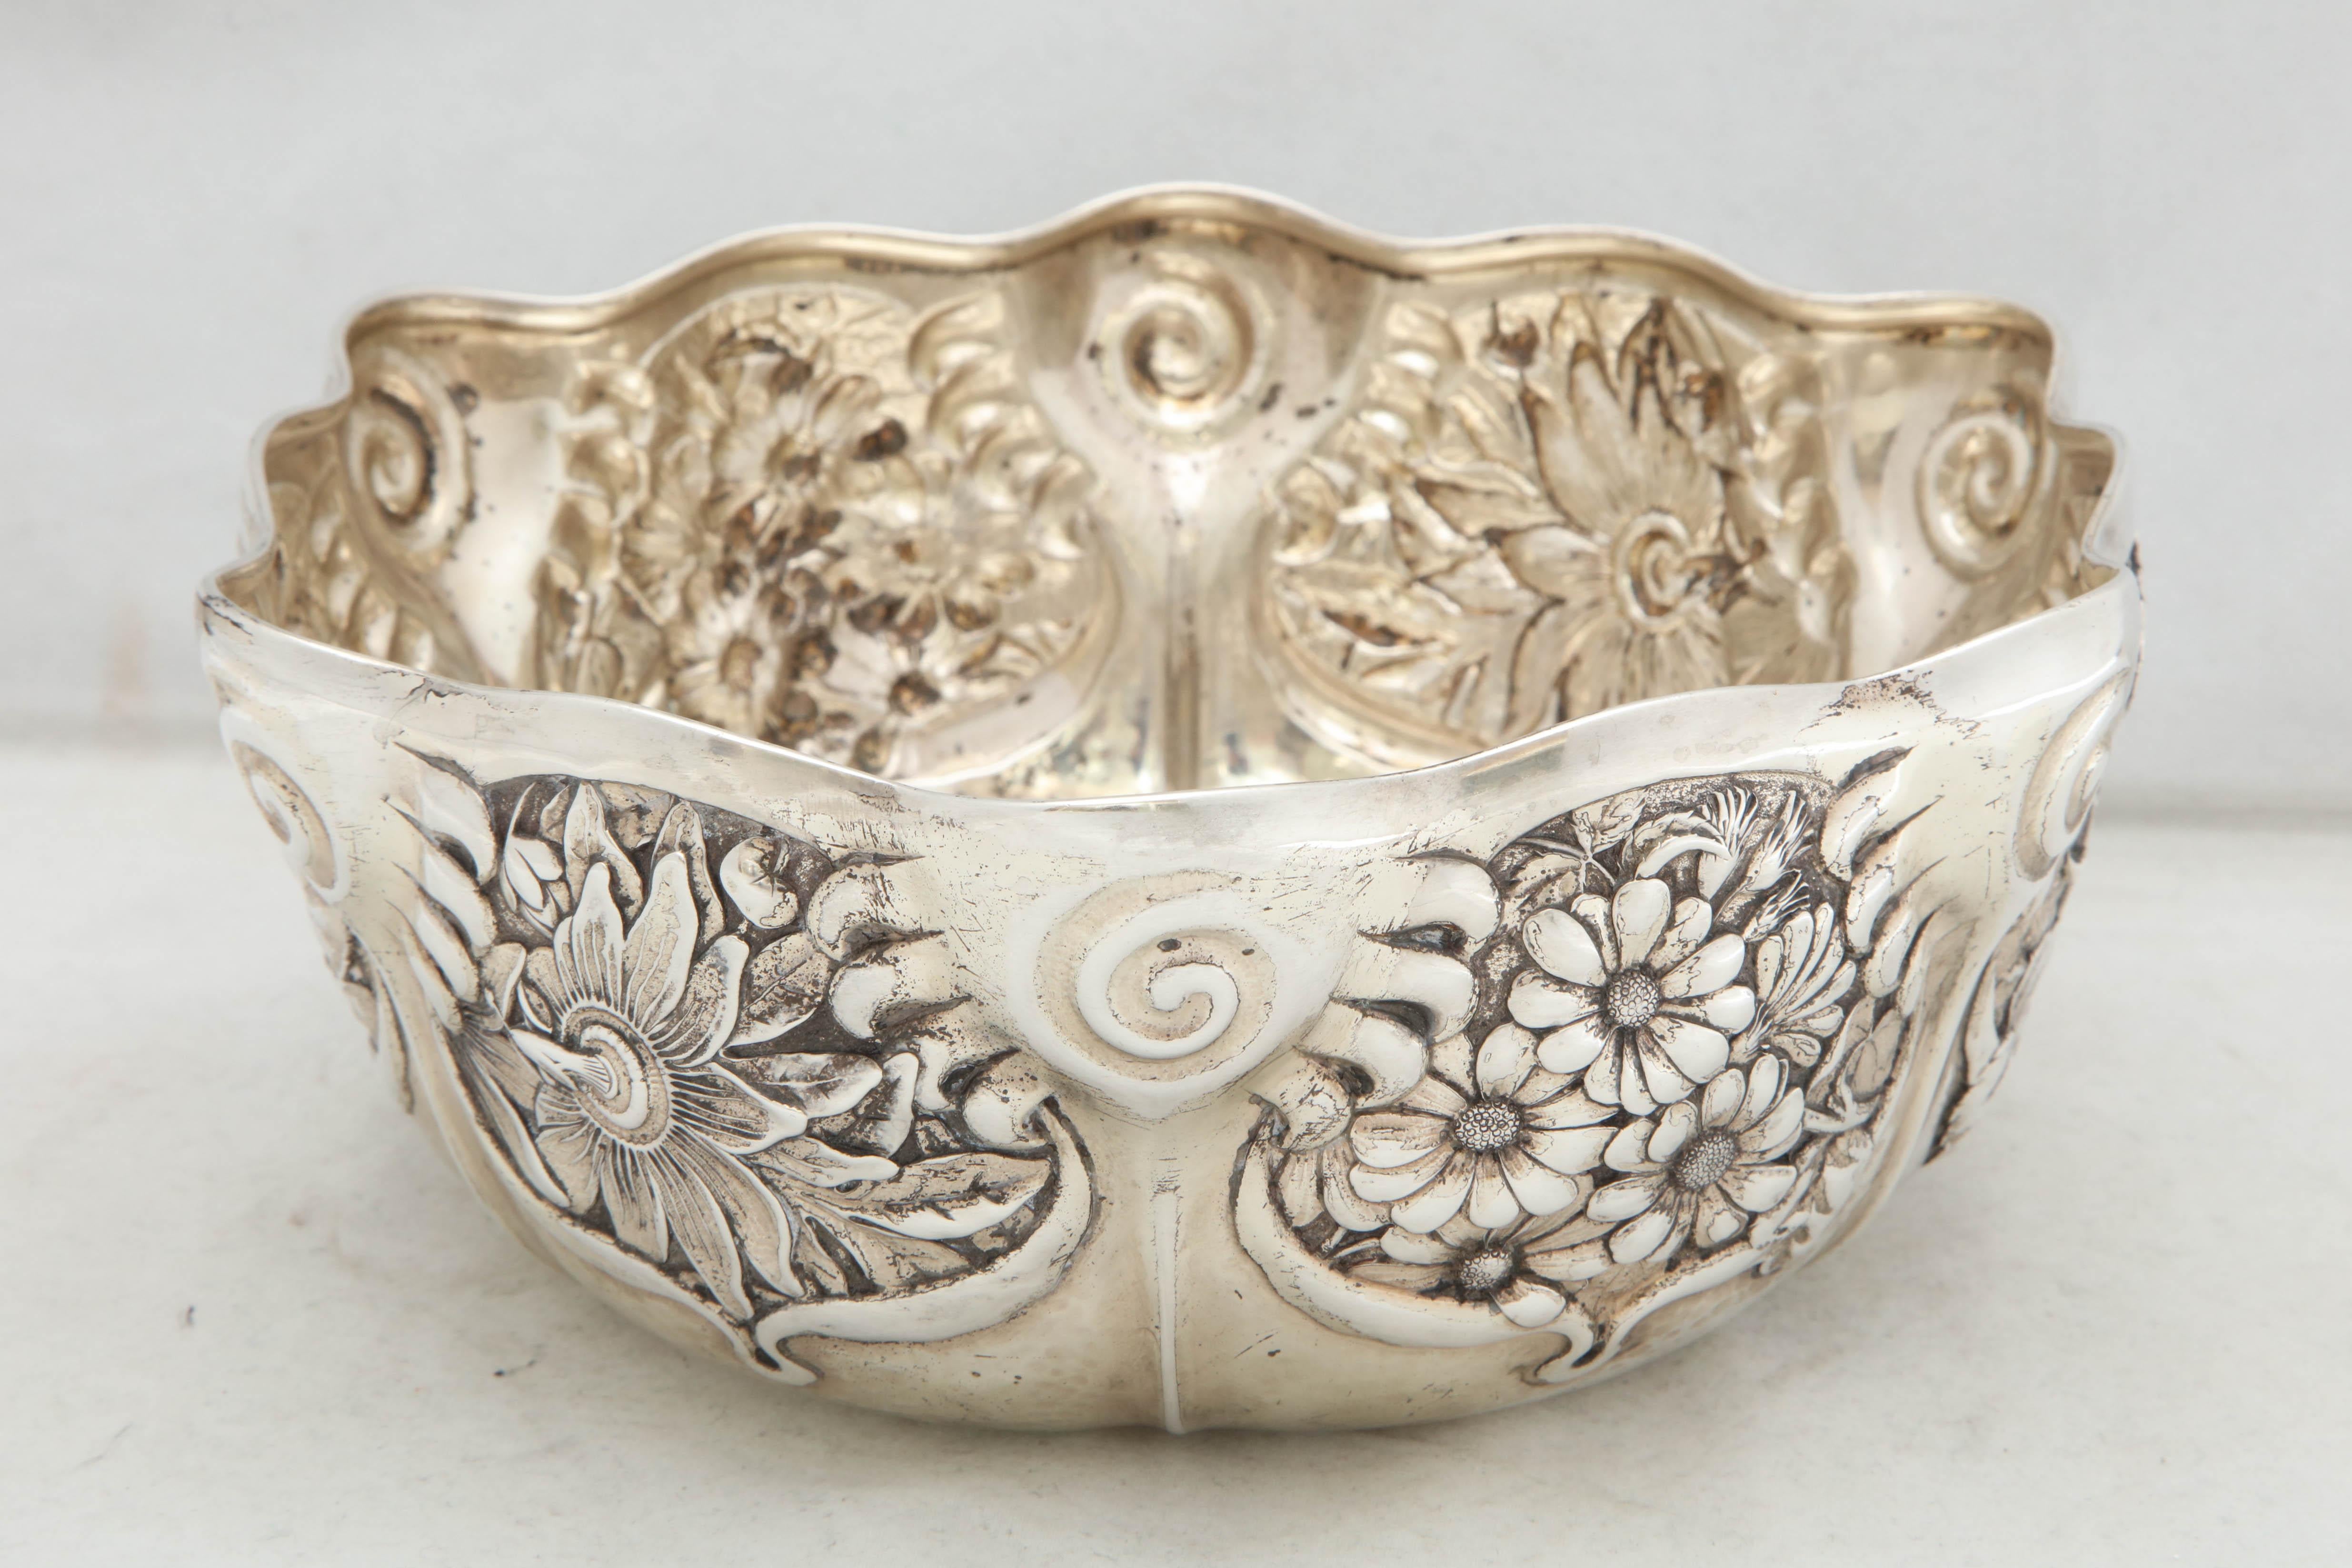 Early 20th Century Art Nouveau Sterling Silver Serving Bowl by Whiting Mfg. Co